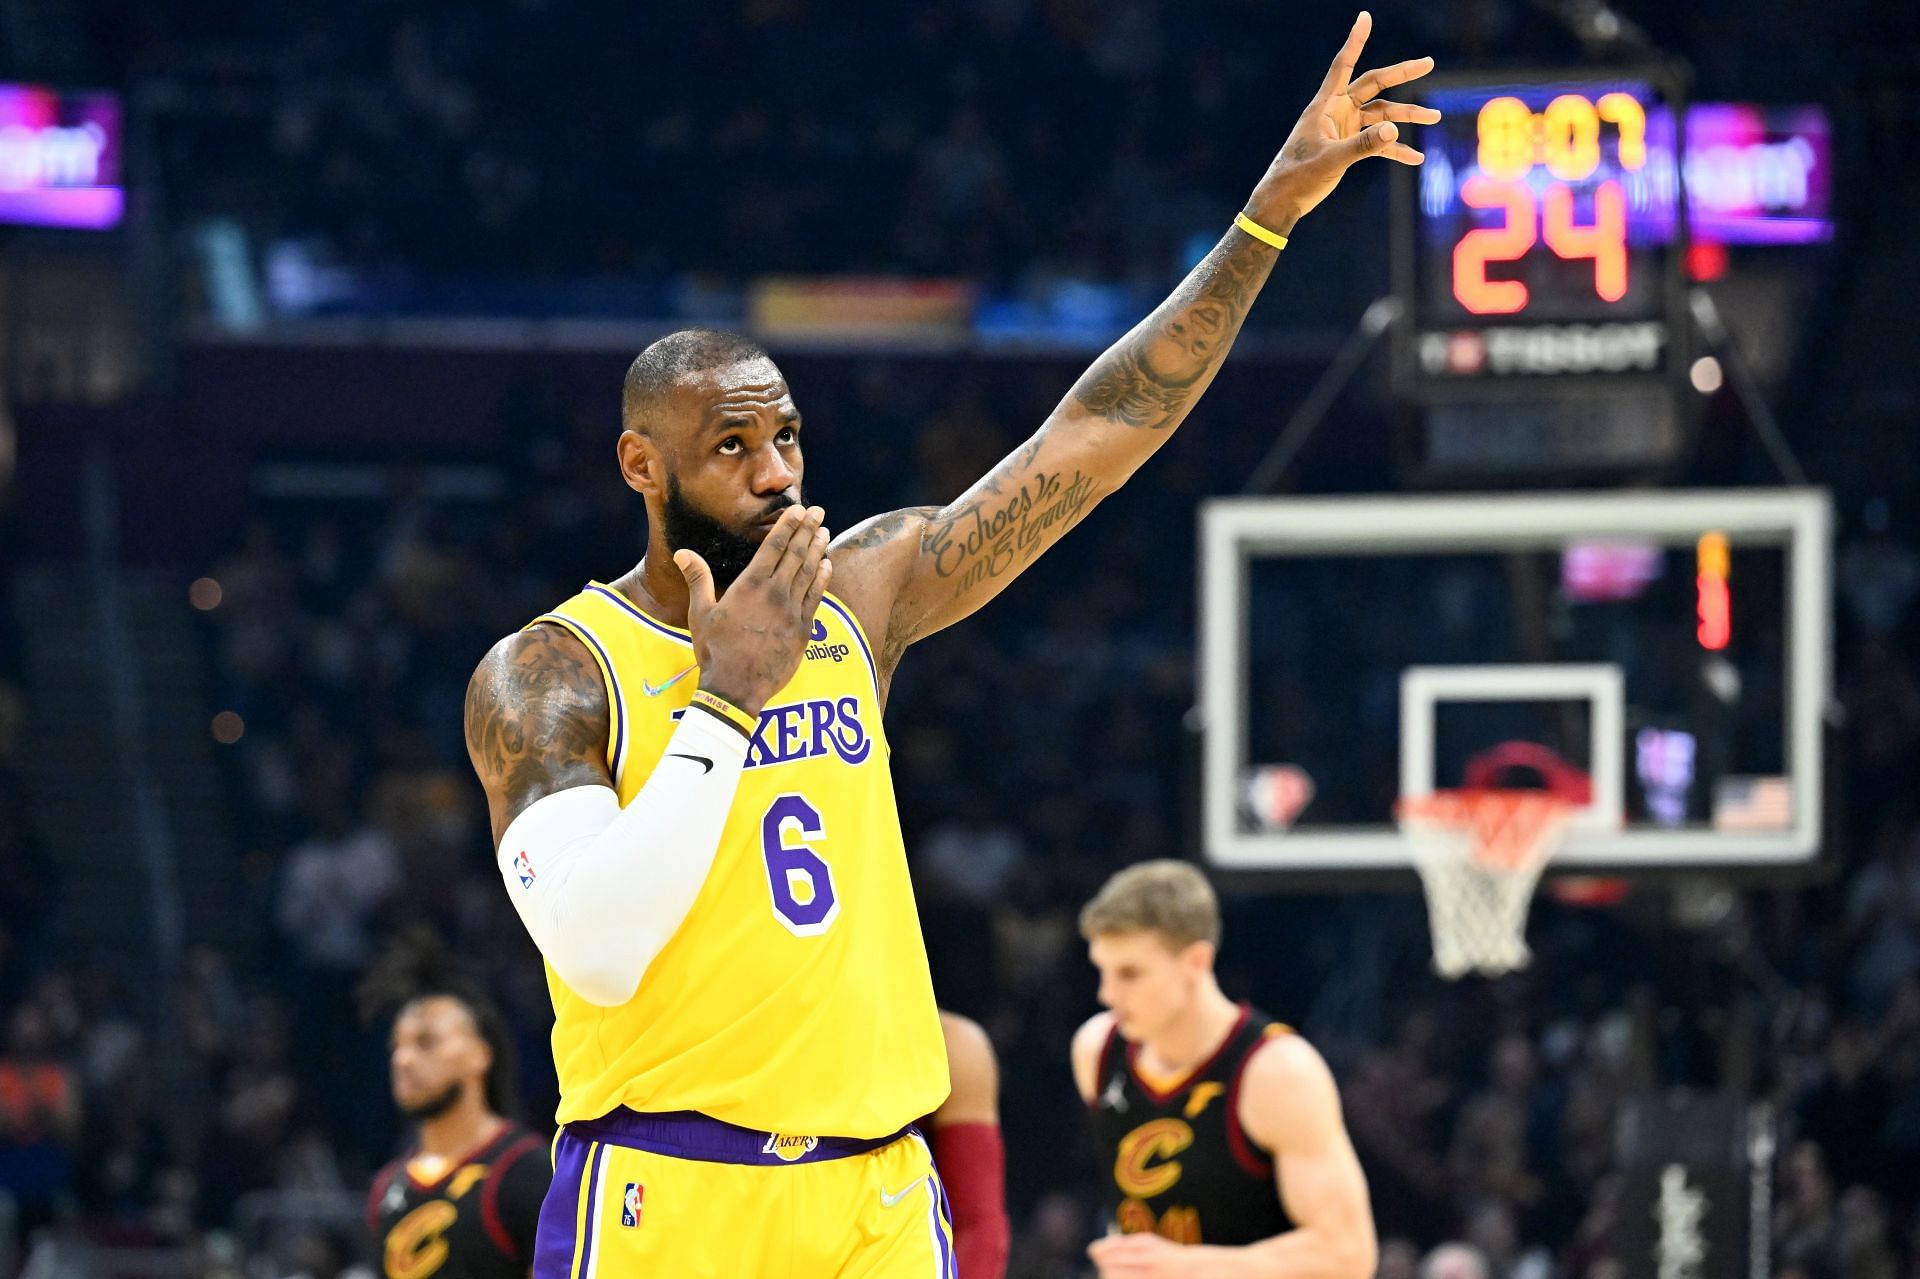 LeBron James of the LA Lakers waves to the crowd during the first quarter against the Cleveland Cavaliers at Rocket Mortgage Fieldhouse on March 21 in Cleveland, Ohio.